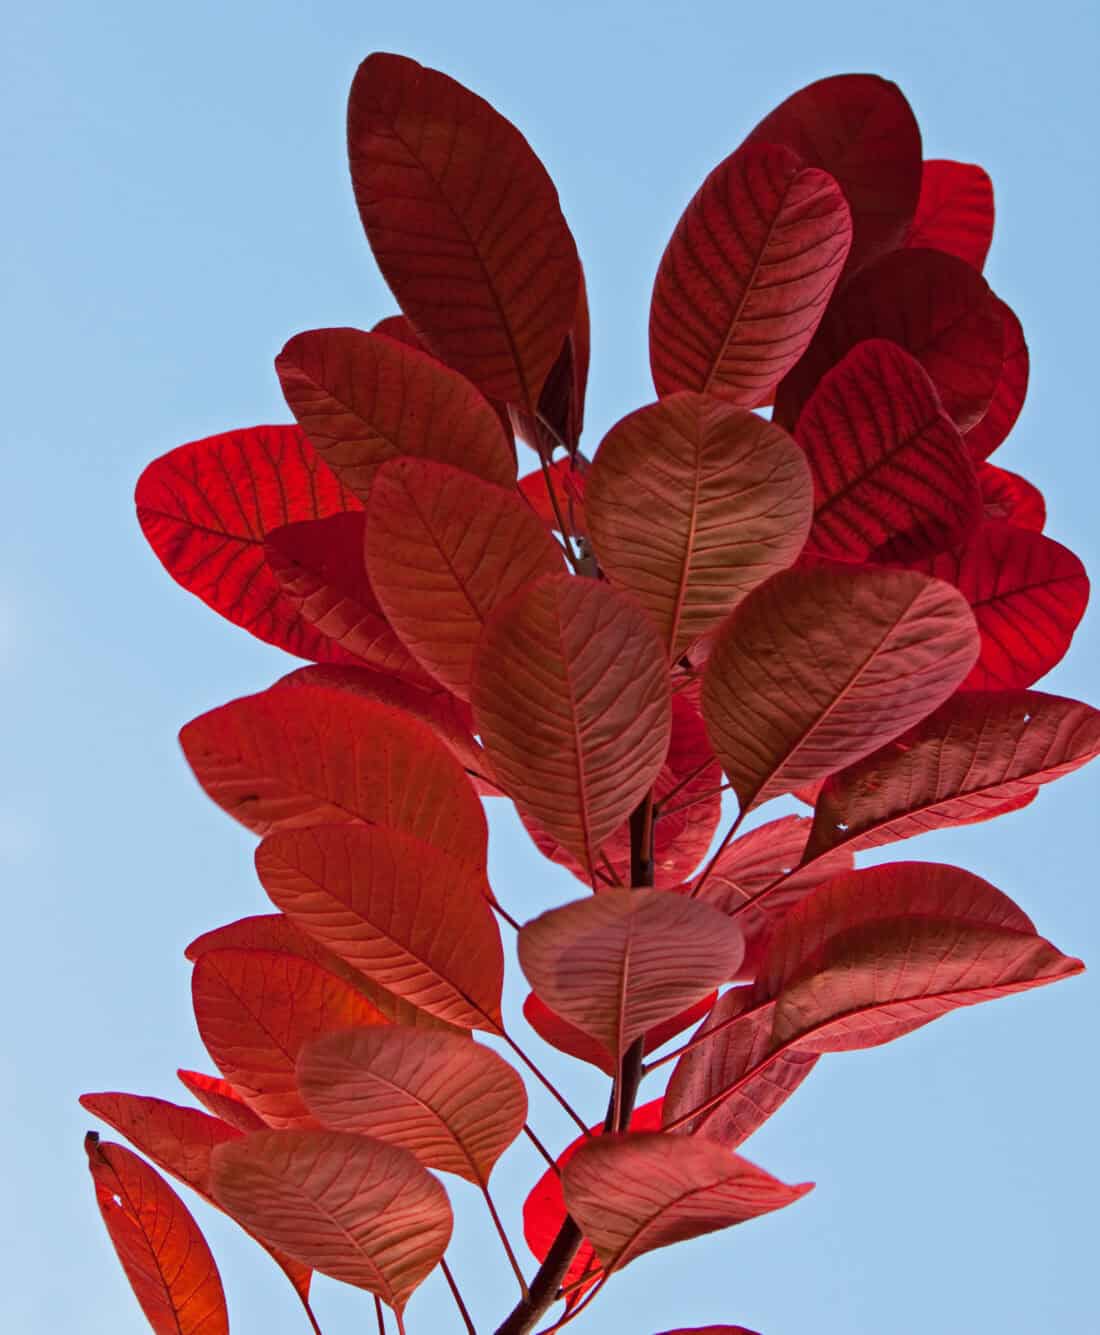 Vibrant red leaves on a branch stand out against a clear blue sky, creating a striking contrast between the warm and cool colors. The leaves are oval-shaped, and their rich hue hints at the autumn season, making it an ideal backdrop for a rejuvenating backyard yoga session.